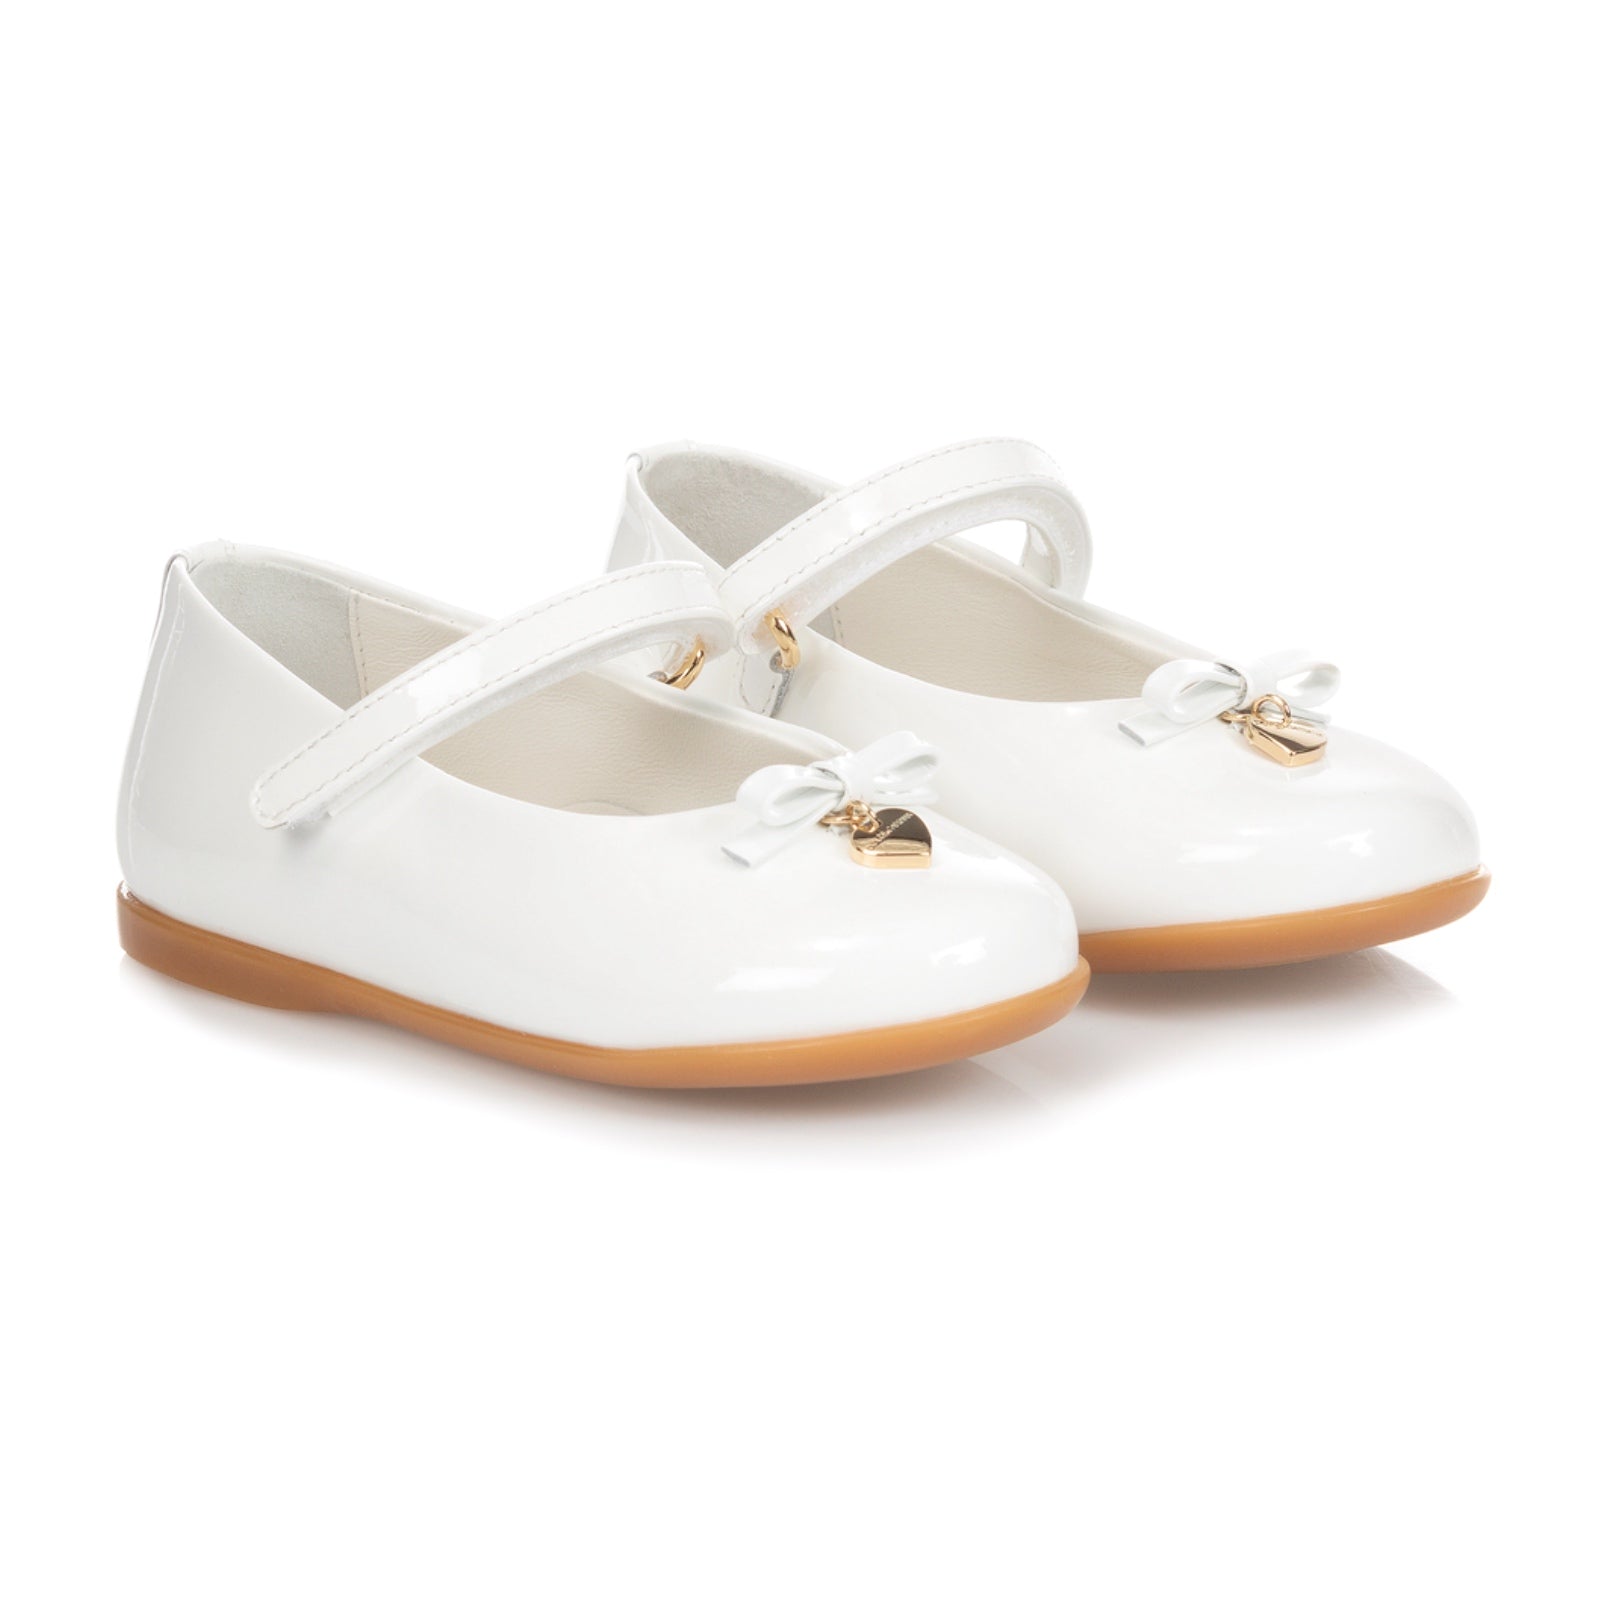 bow-detail leather ballet flats in white